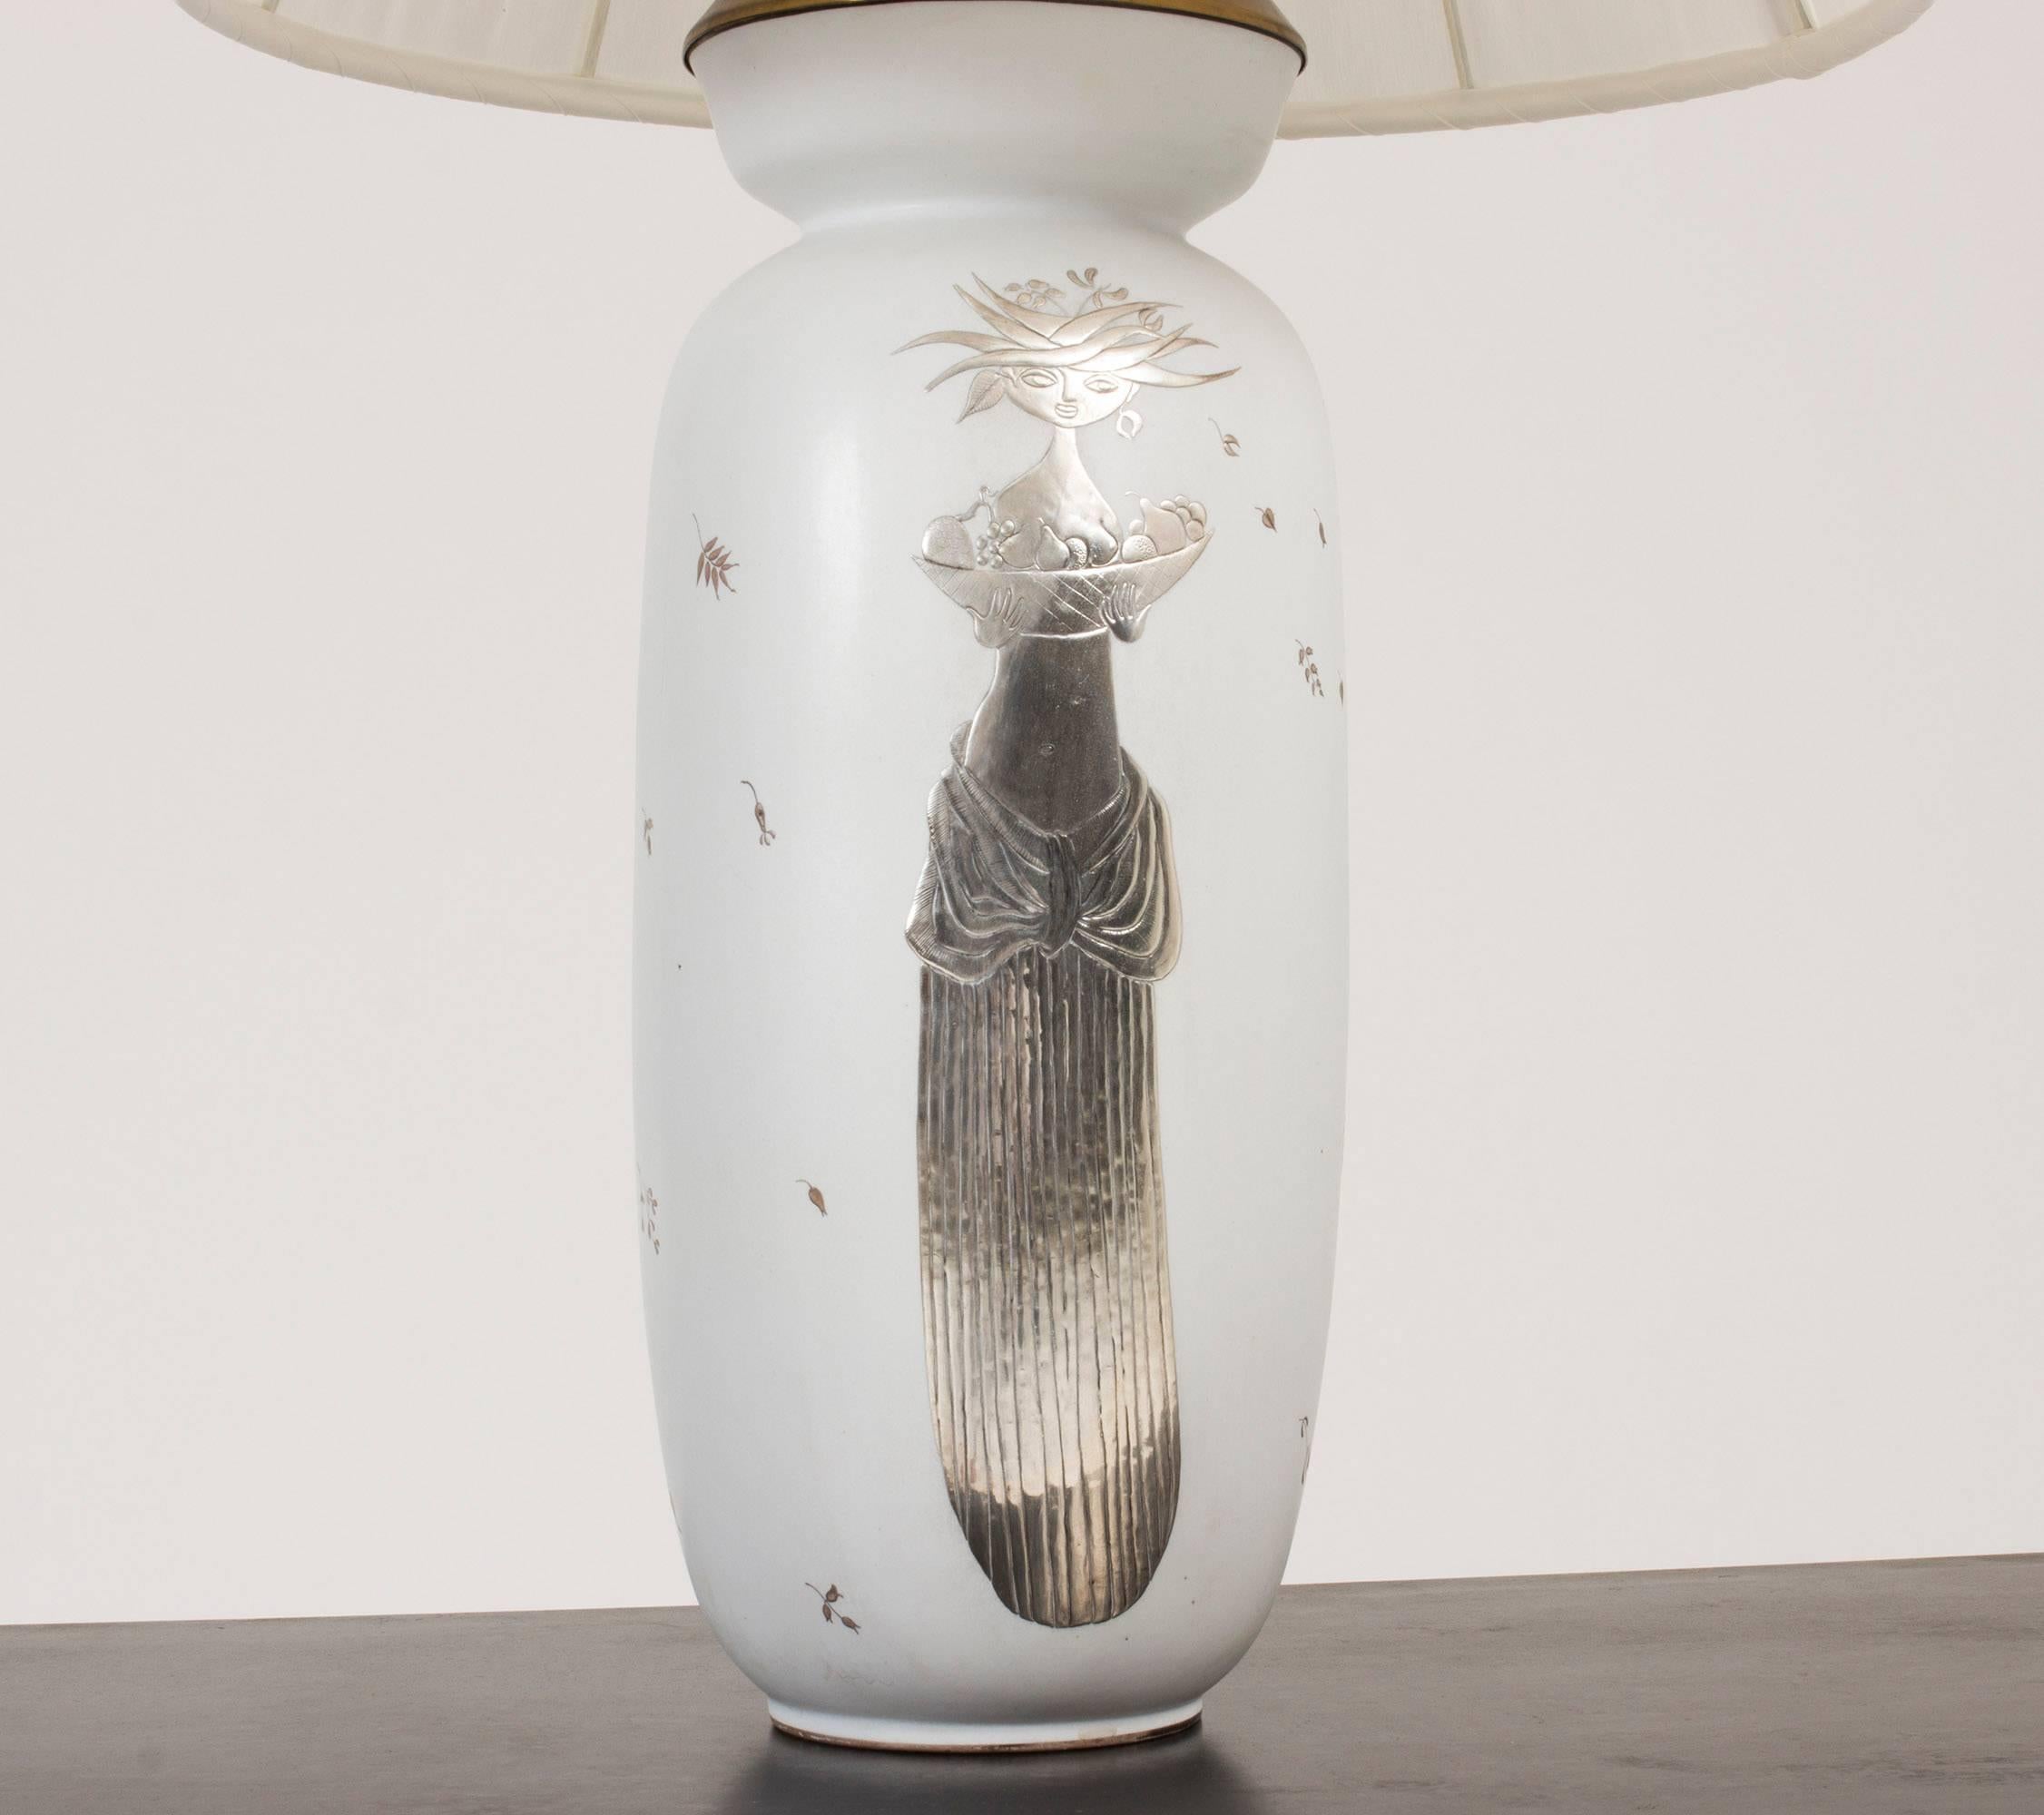 Beautiful, tall “Grazia” table lamp by Stig Lindberg made from Carrara stoneware. Exquisite silver decor of a woman holding a basket full of fruits. White textile shade reupholstered on the original lamp shade frame.

Measure: The height of the